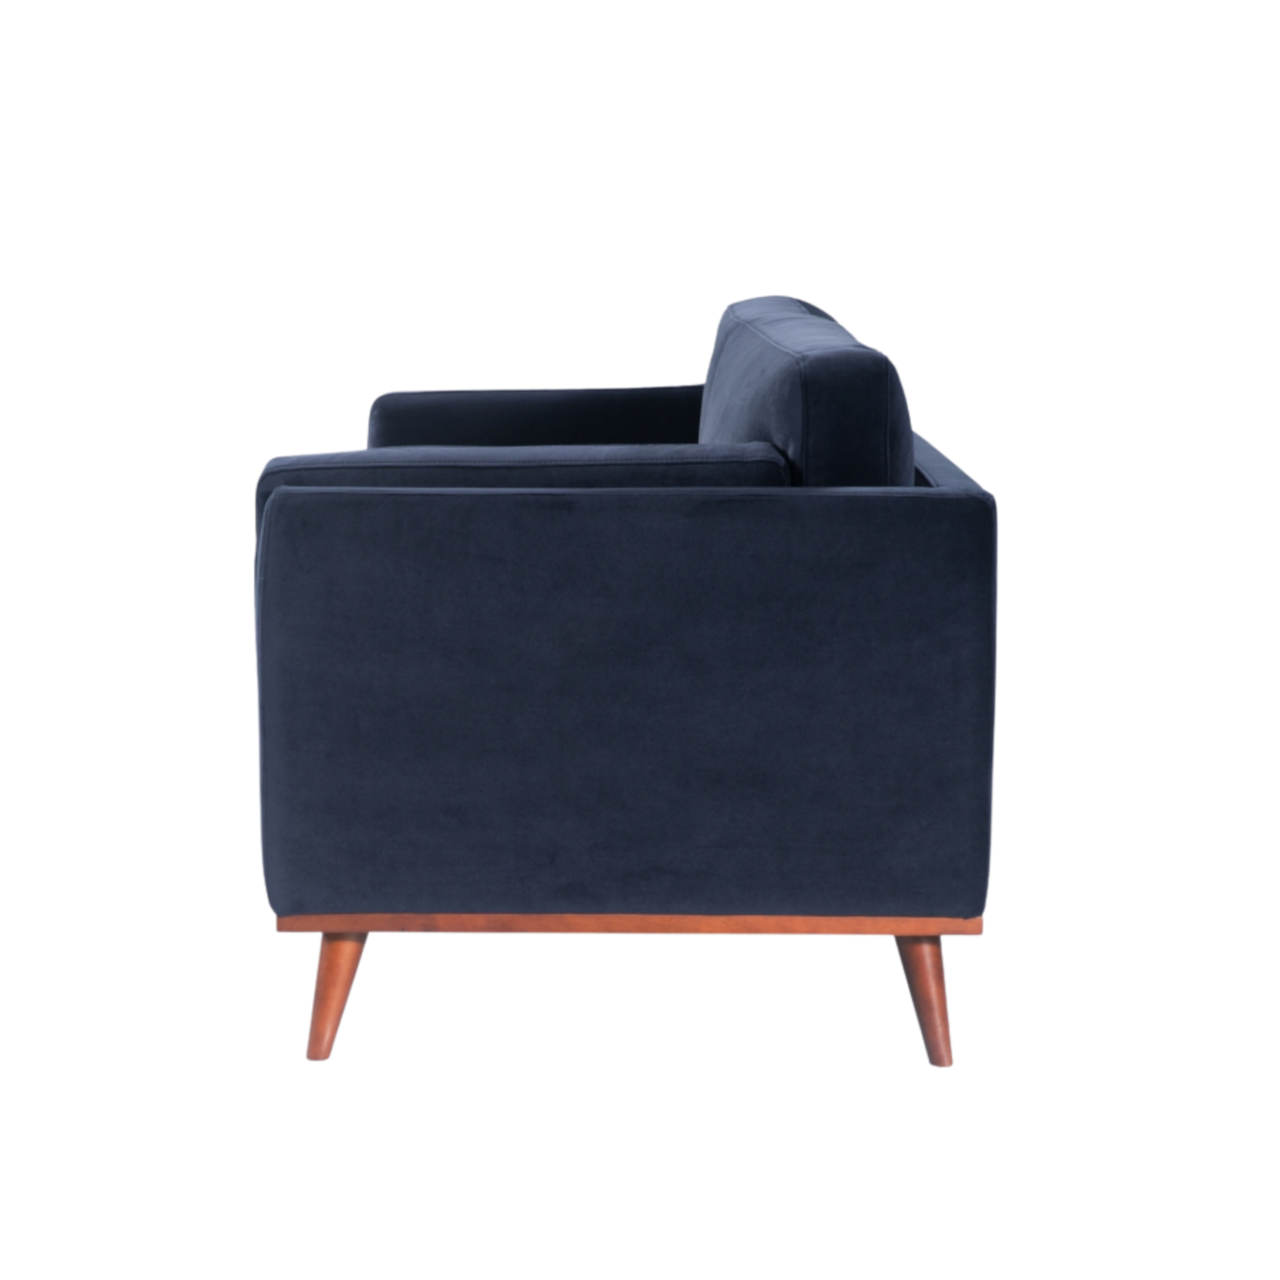 side view of Simple, modern shaped 2 seater sofa in midnight blue velvet upholstery